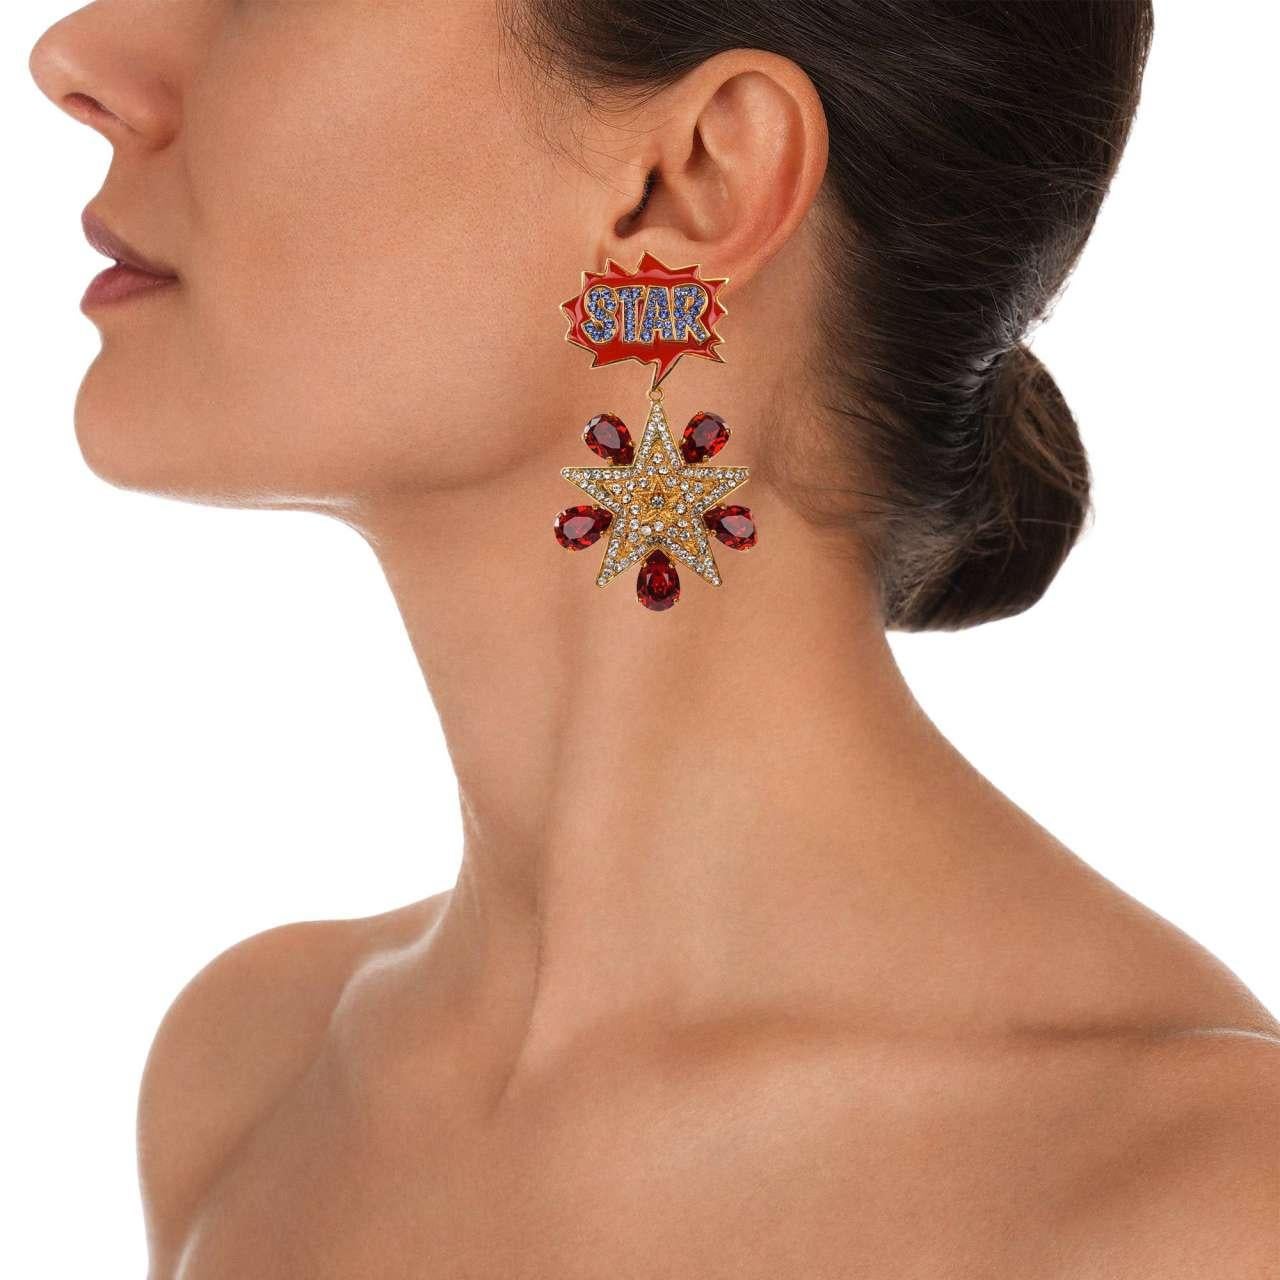 Dolce & Gabbana - Fumetti Cartoons Crystal Star Clip Earrings Gold Red Blue In Excellent Condition For Sale In Erkrath, DE